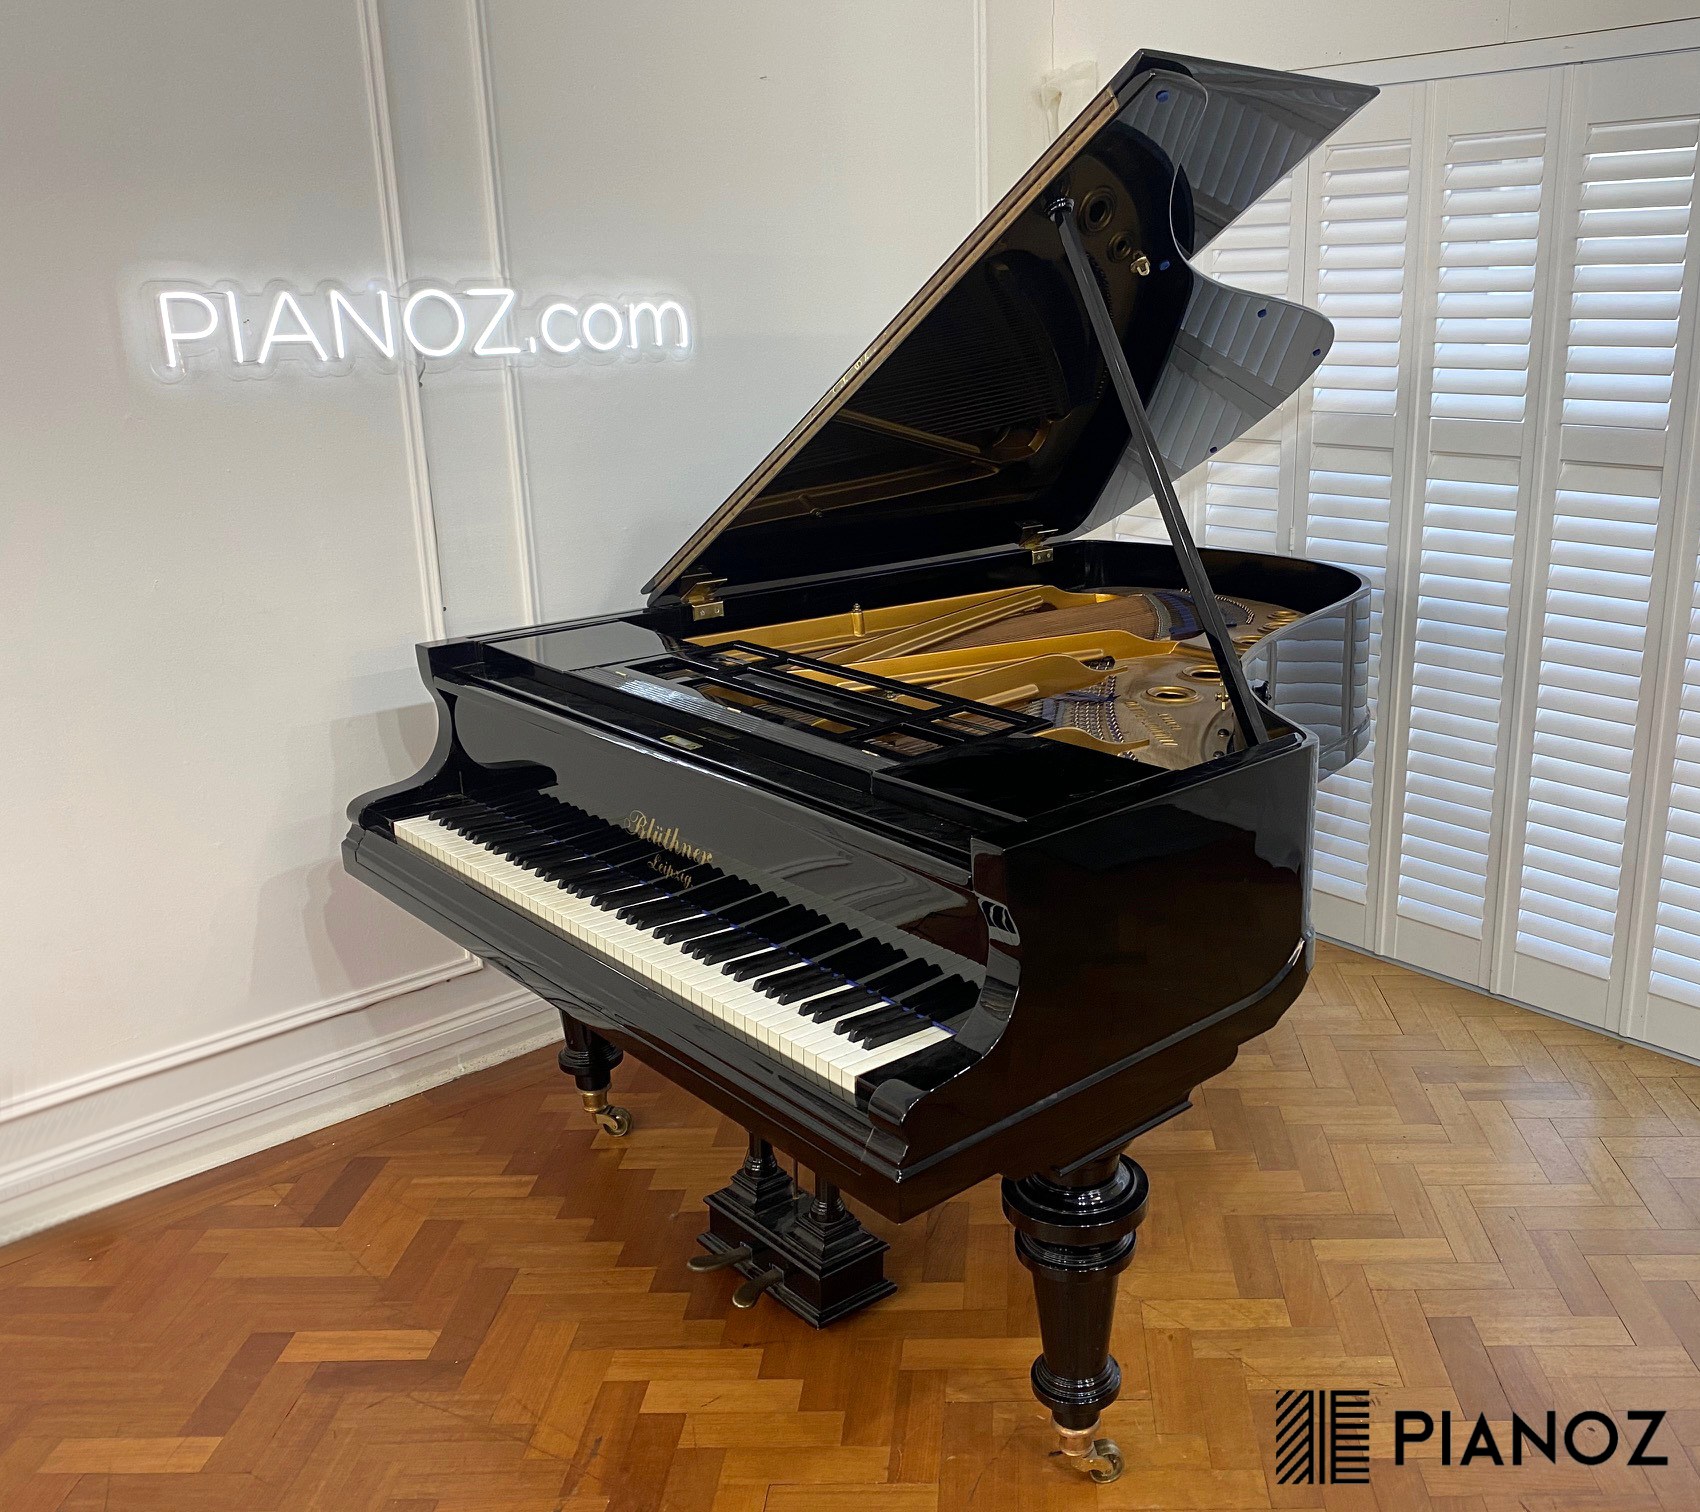 Bluthner Style 8 Restored Grand Piano piano for sale in UK